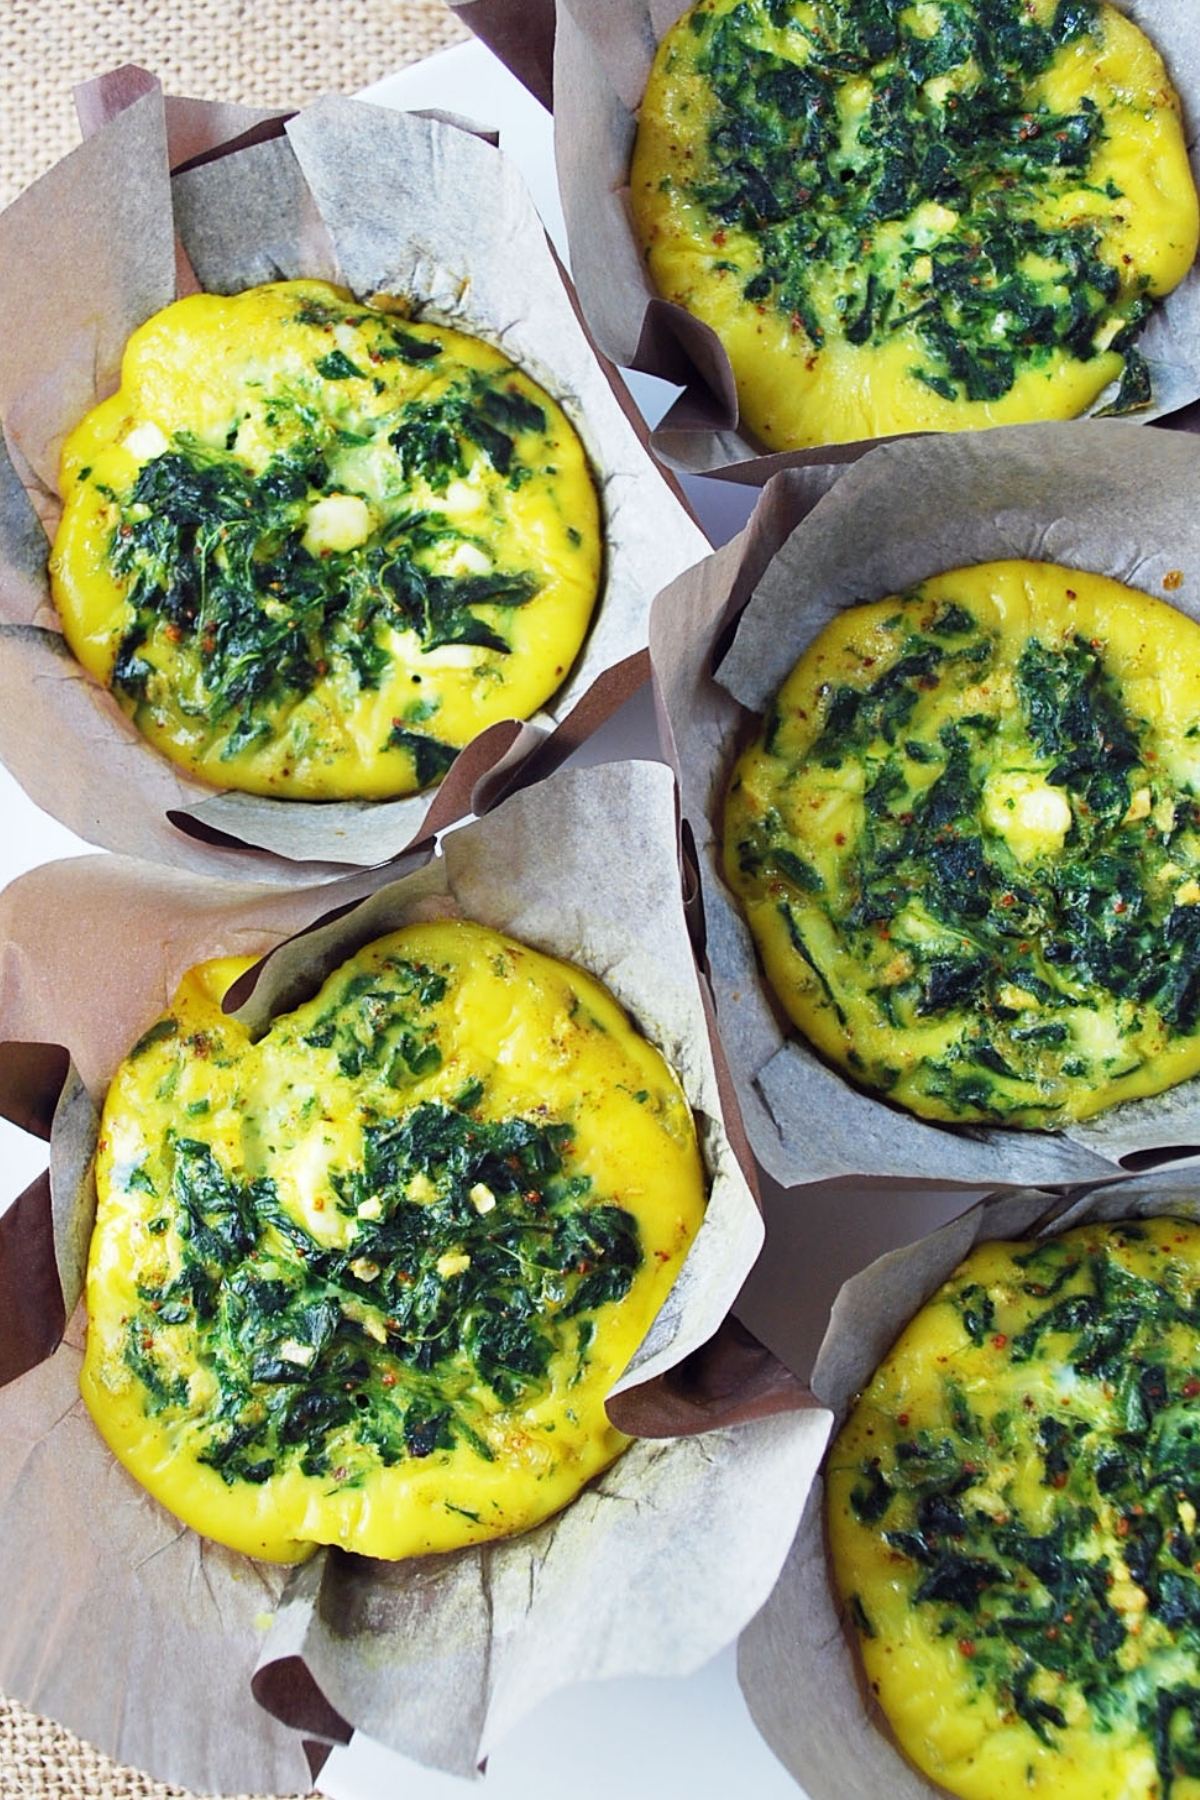 A quick and easy recipe for Spinach Frittata Muffins made with spinach, eggs, feta cheese, and ground turmeric. These delicious mini frittatas are perfect for breakfast on-the-go! via @Ameessavorydish